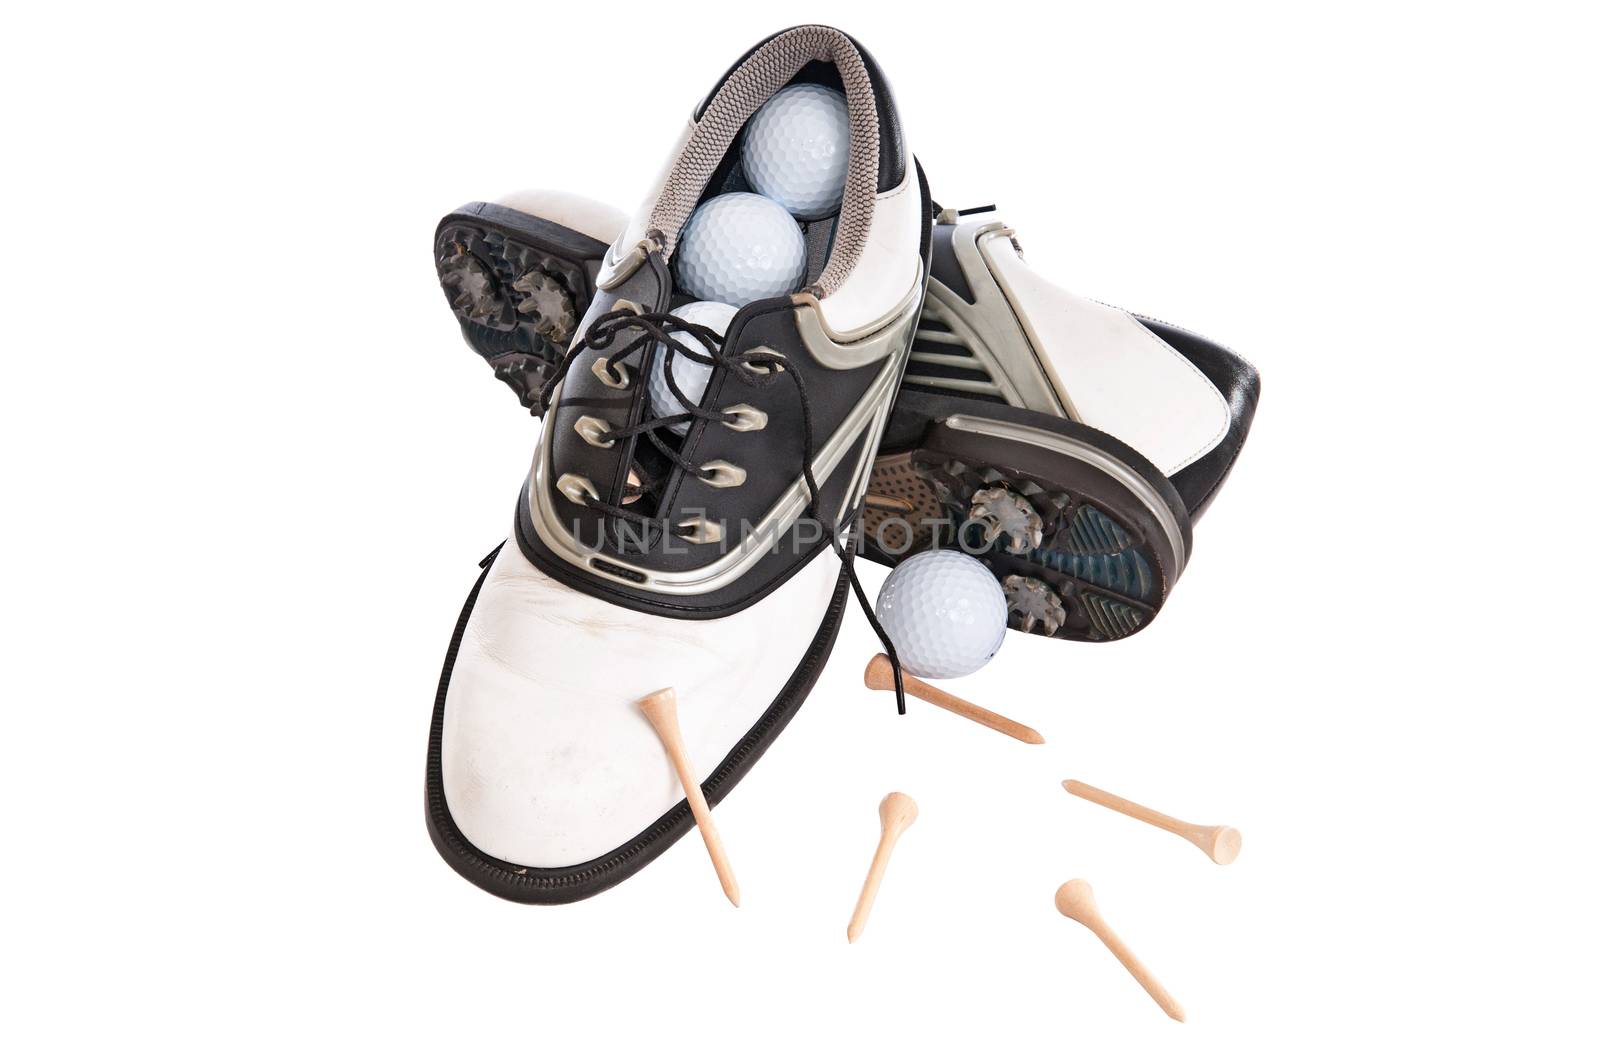 Woman's Golf Shoes by rcarner